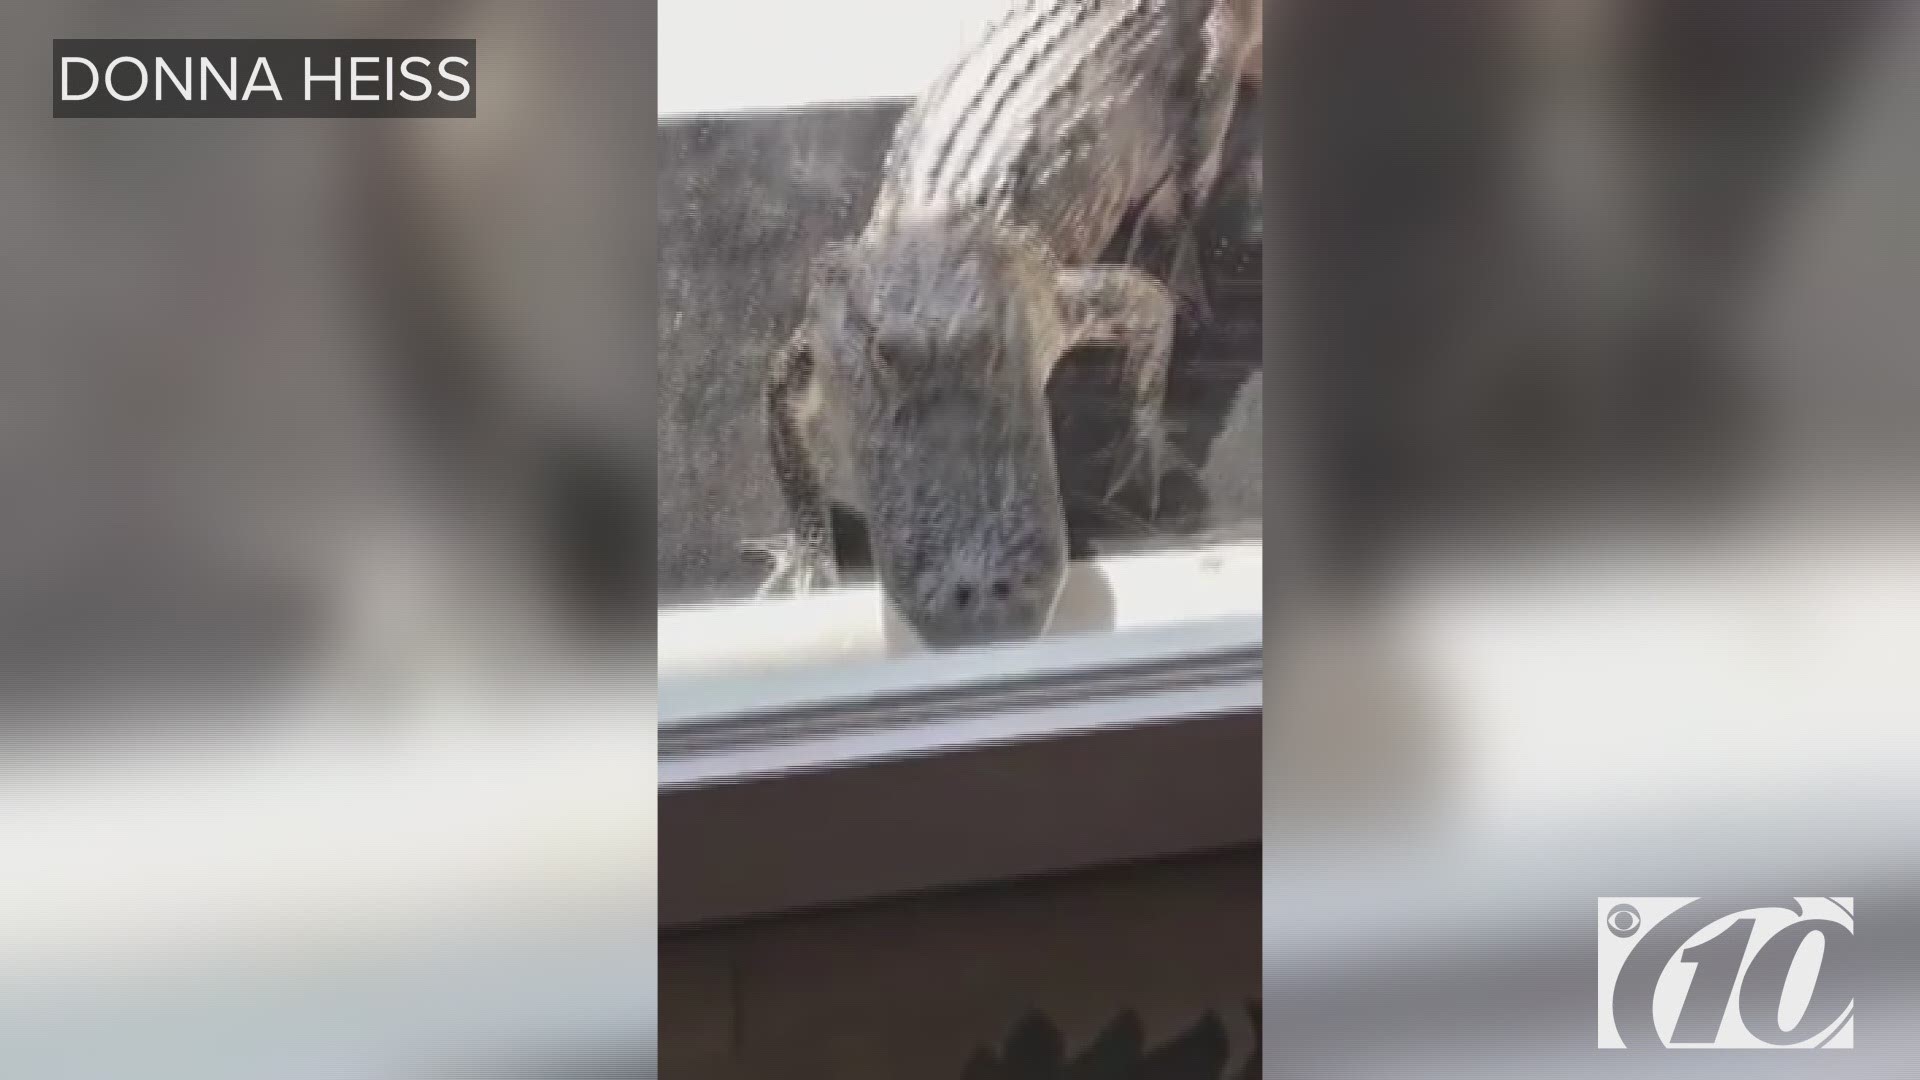 The alligator was between 7 and 8 feet long. https://on.wtsp.com/2UX8LjV